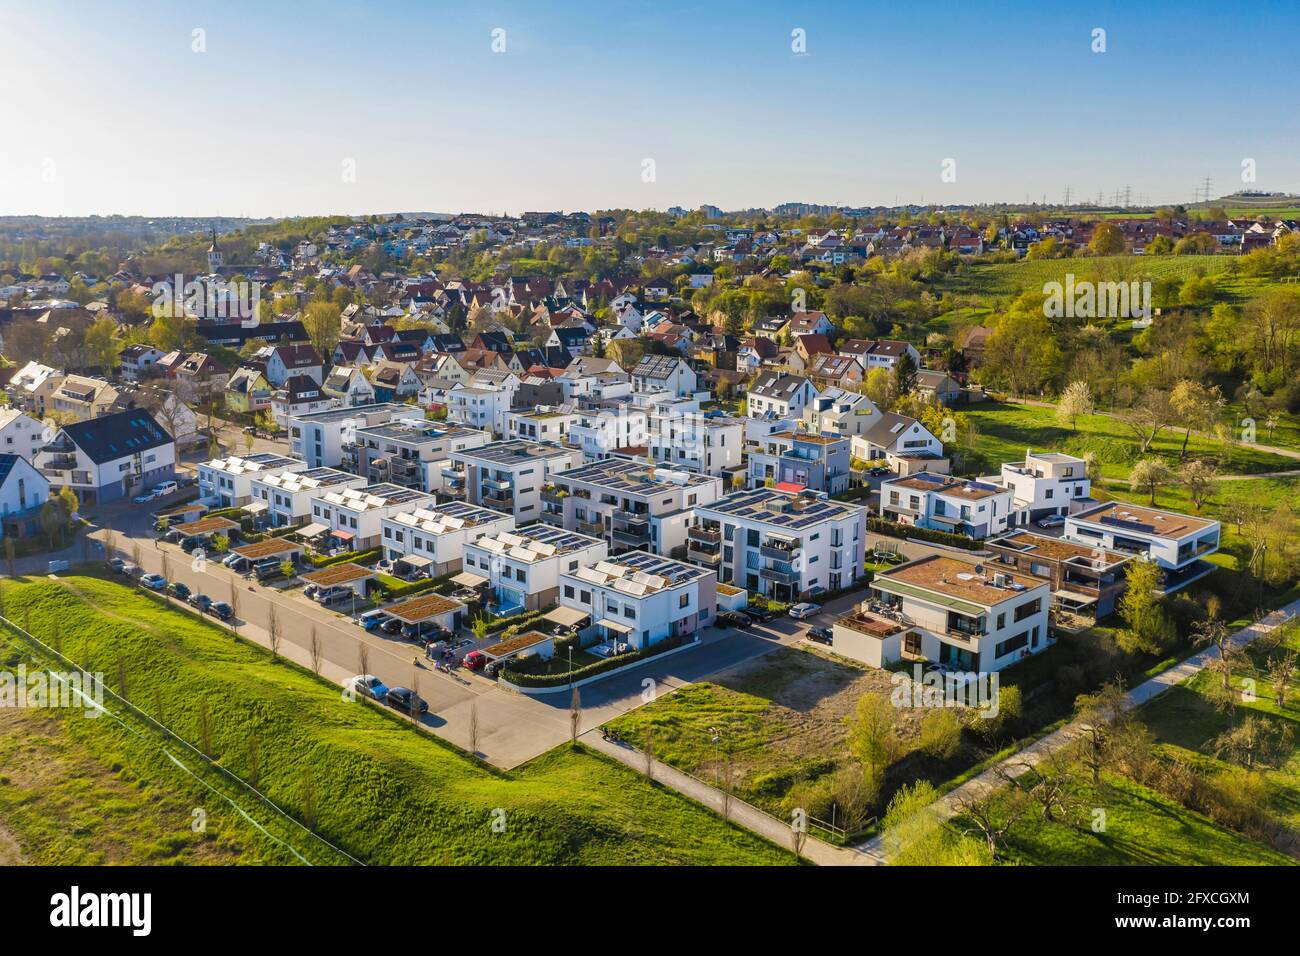 Germany, Baden-Wurttemberg, Waiblingen, Aerial view of modern suburb with energy efficient single and multi family houses Stock Photo